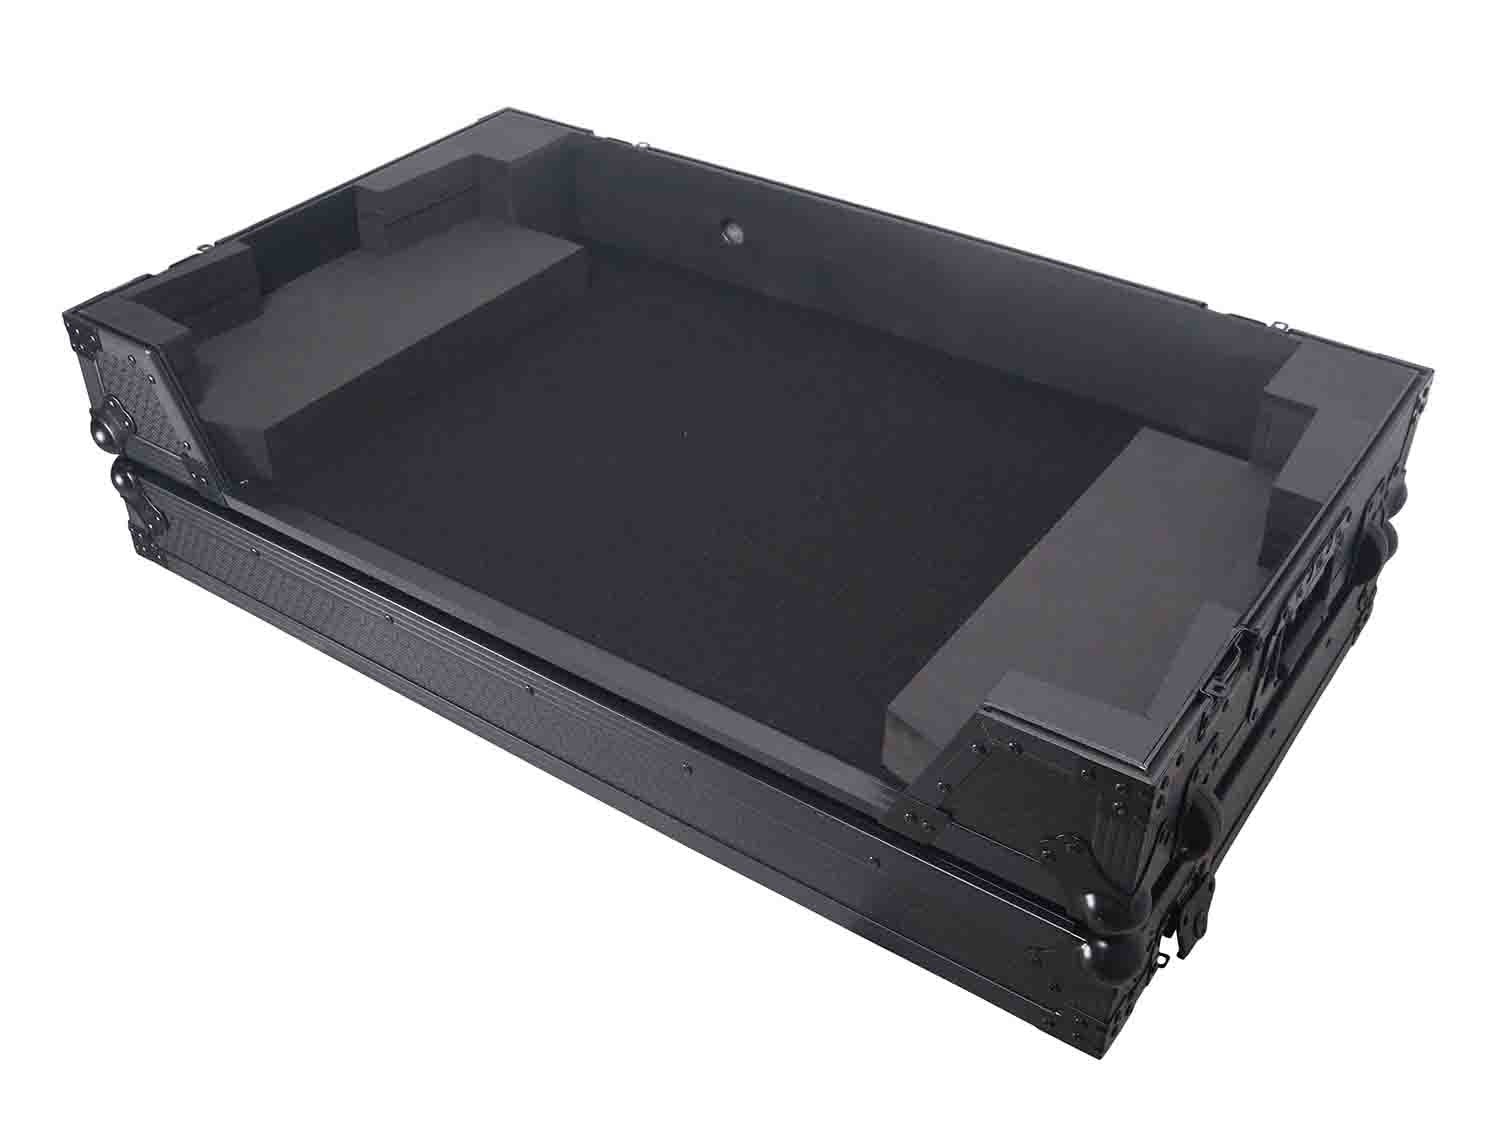 B-Stock: ProX XS-OPUSQUADWBL Flight Style Road Case for Pioneer Opus Quad DJ Controller with 1U Rack Space and Wheels - Black by ProX Live Performance Gear